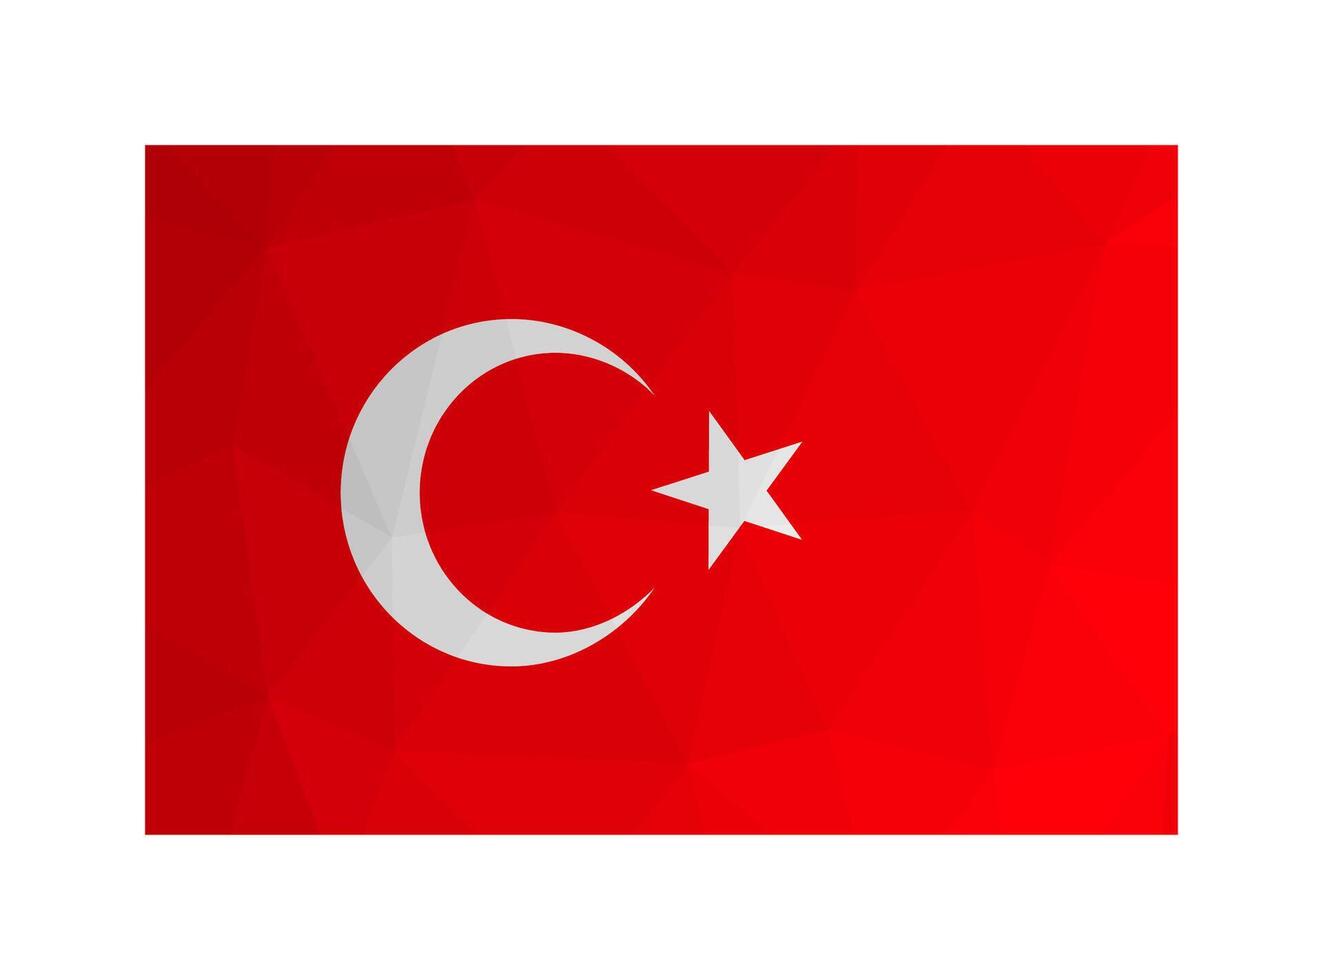 Vector isolated illustration. National Turkish flag with white star and crescent. Official symbol of Turkey. Creative design in low poly style with triangular shapes. Gradient effect.